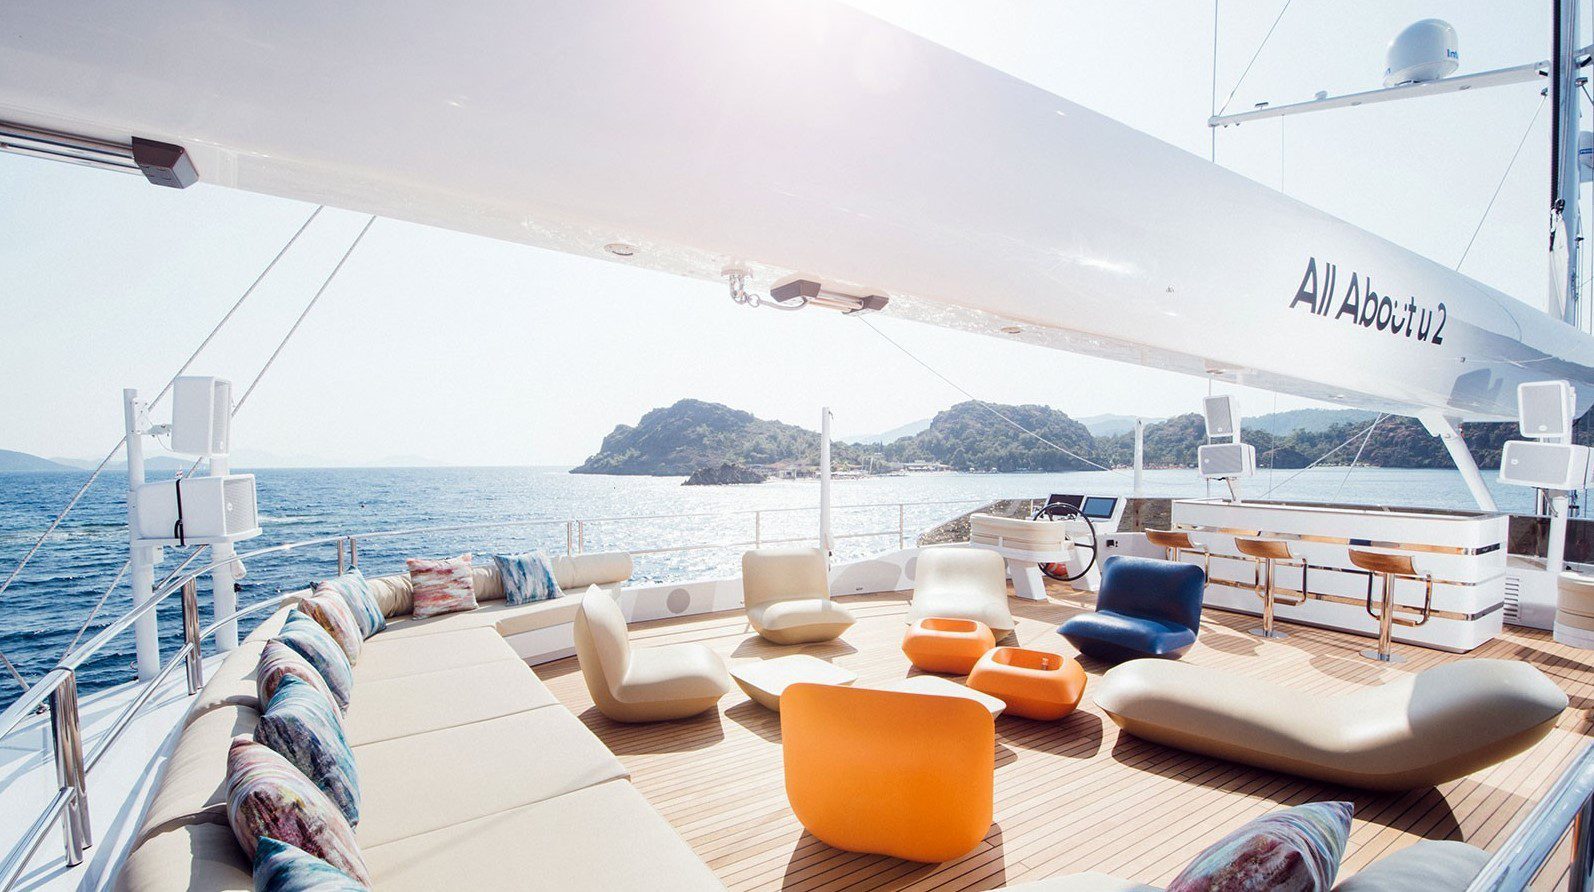 Outdoor furniture for yacht Pillow sofas, armchairs and tables by Vondom